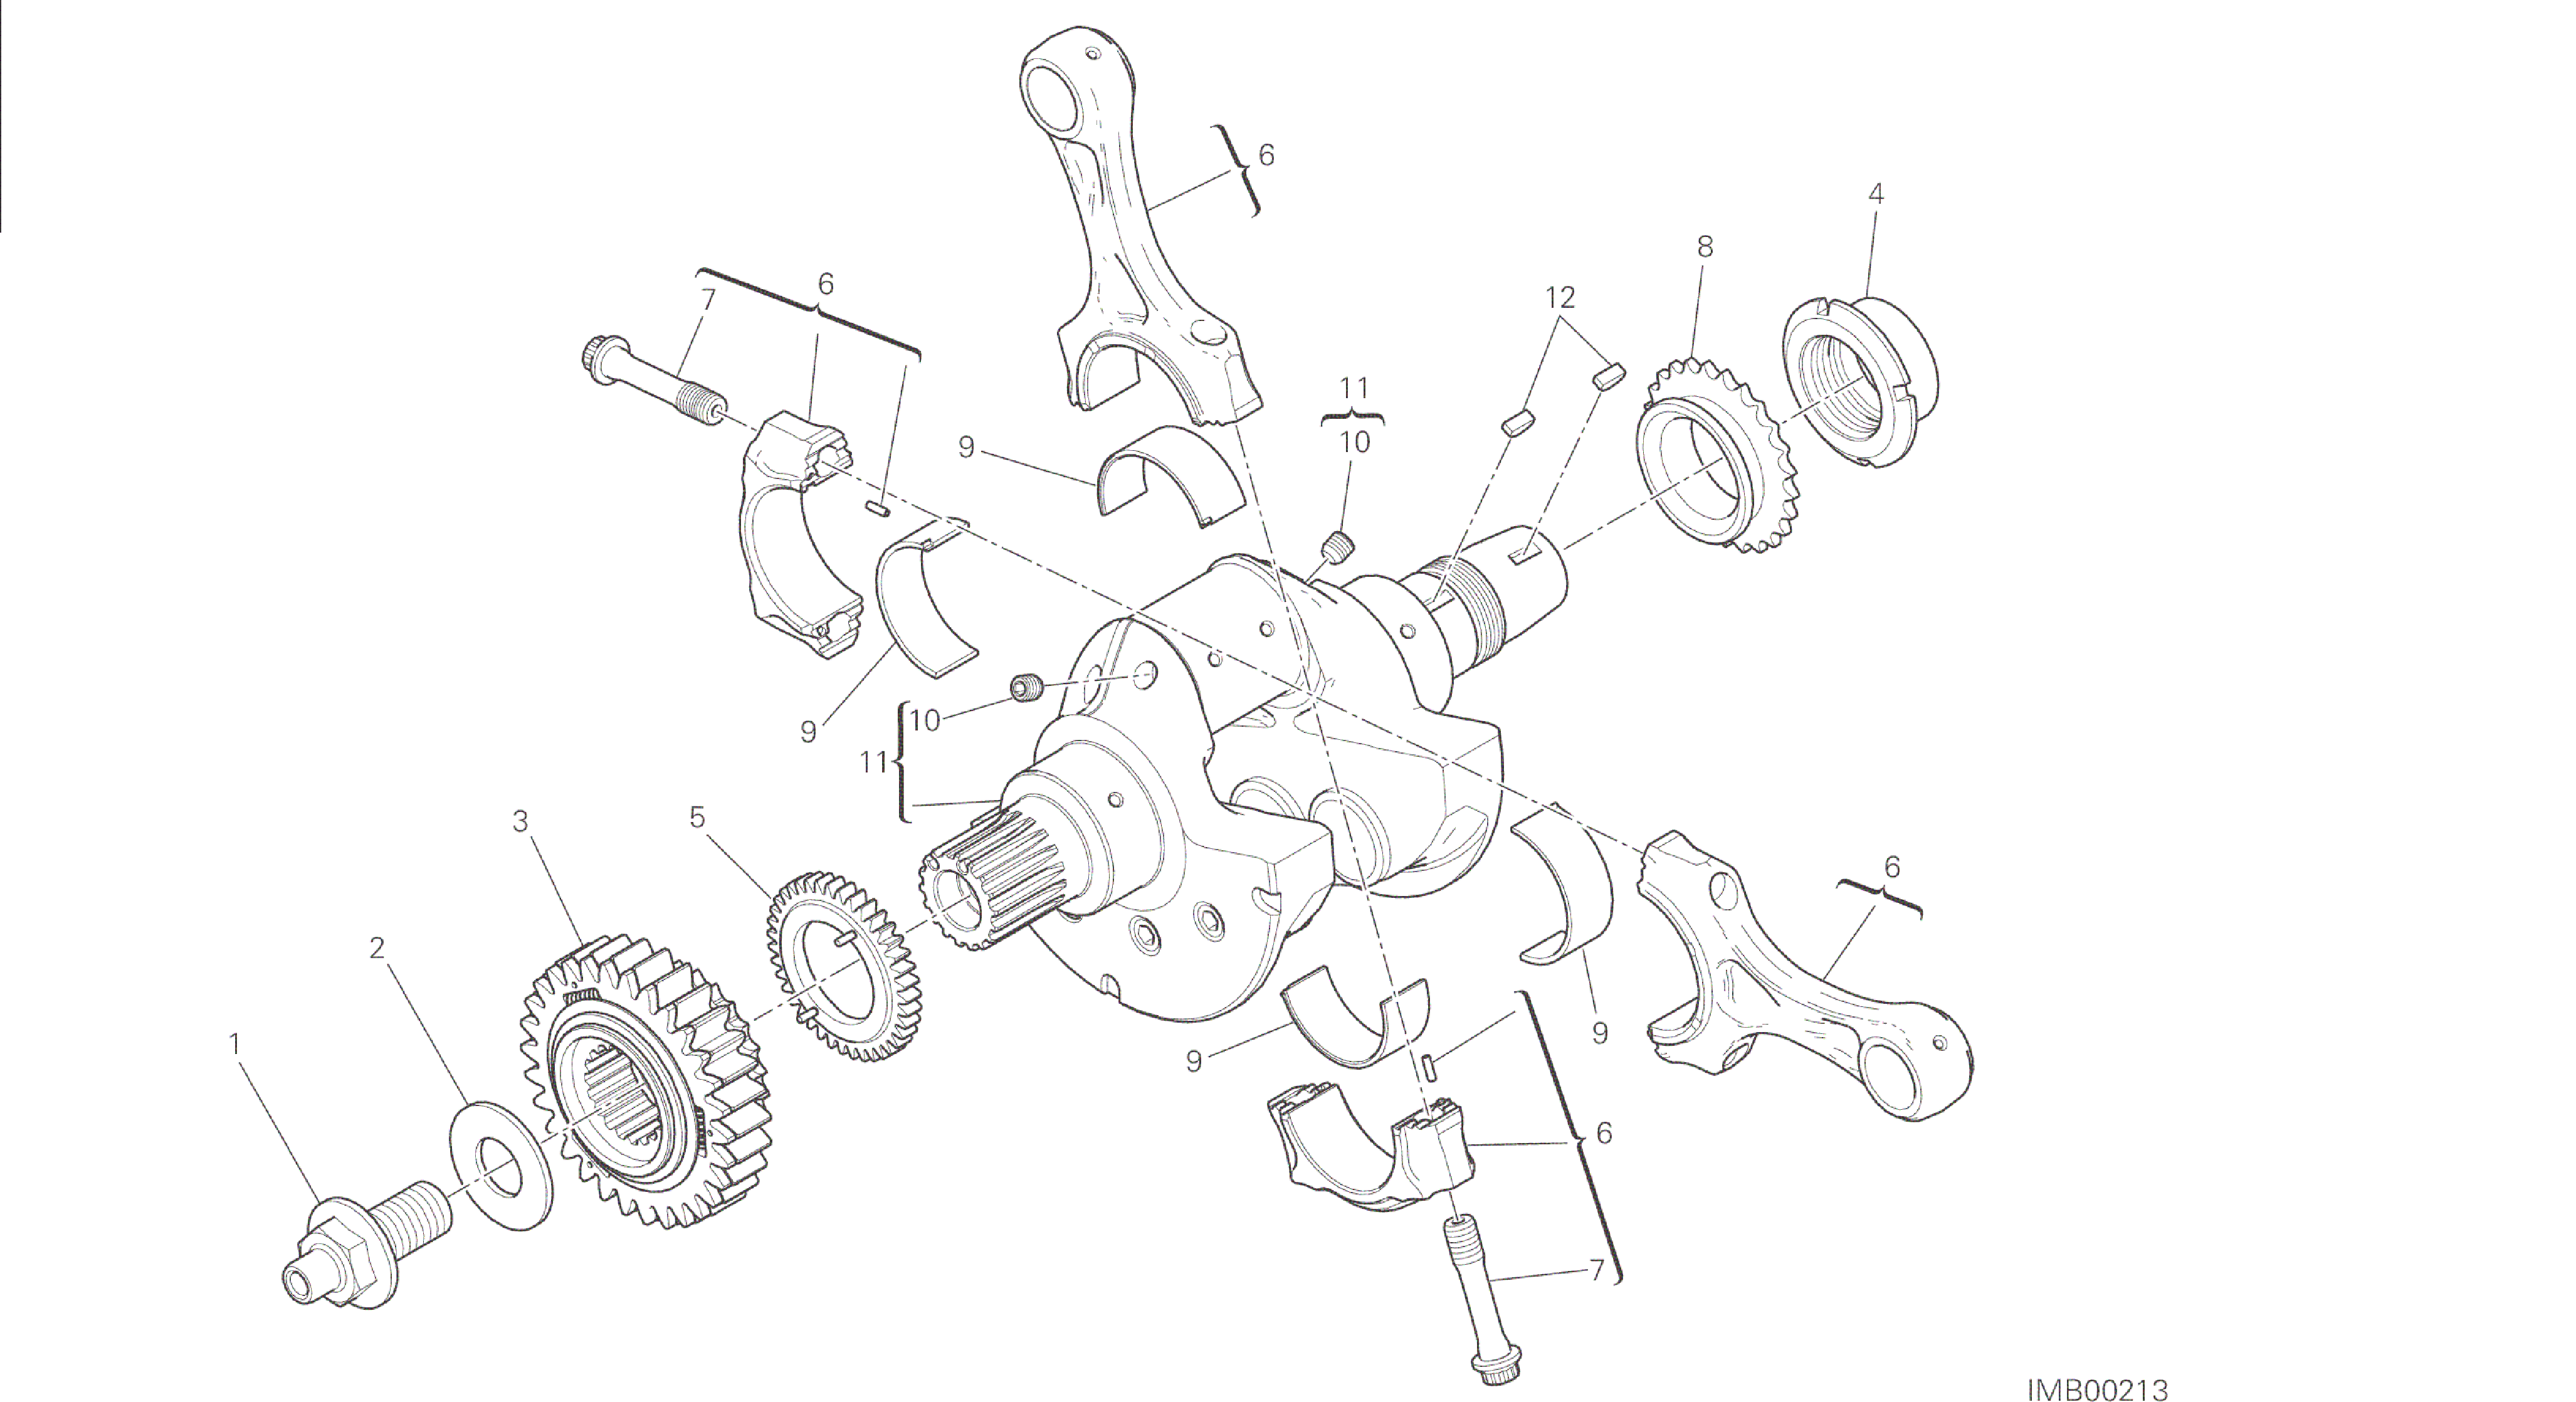 DRAWING 006 - CONNECTING RODS [MOD:1299;XST:AUS,EUR,FRA,JAP,TWN]GROUP ENGINE